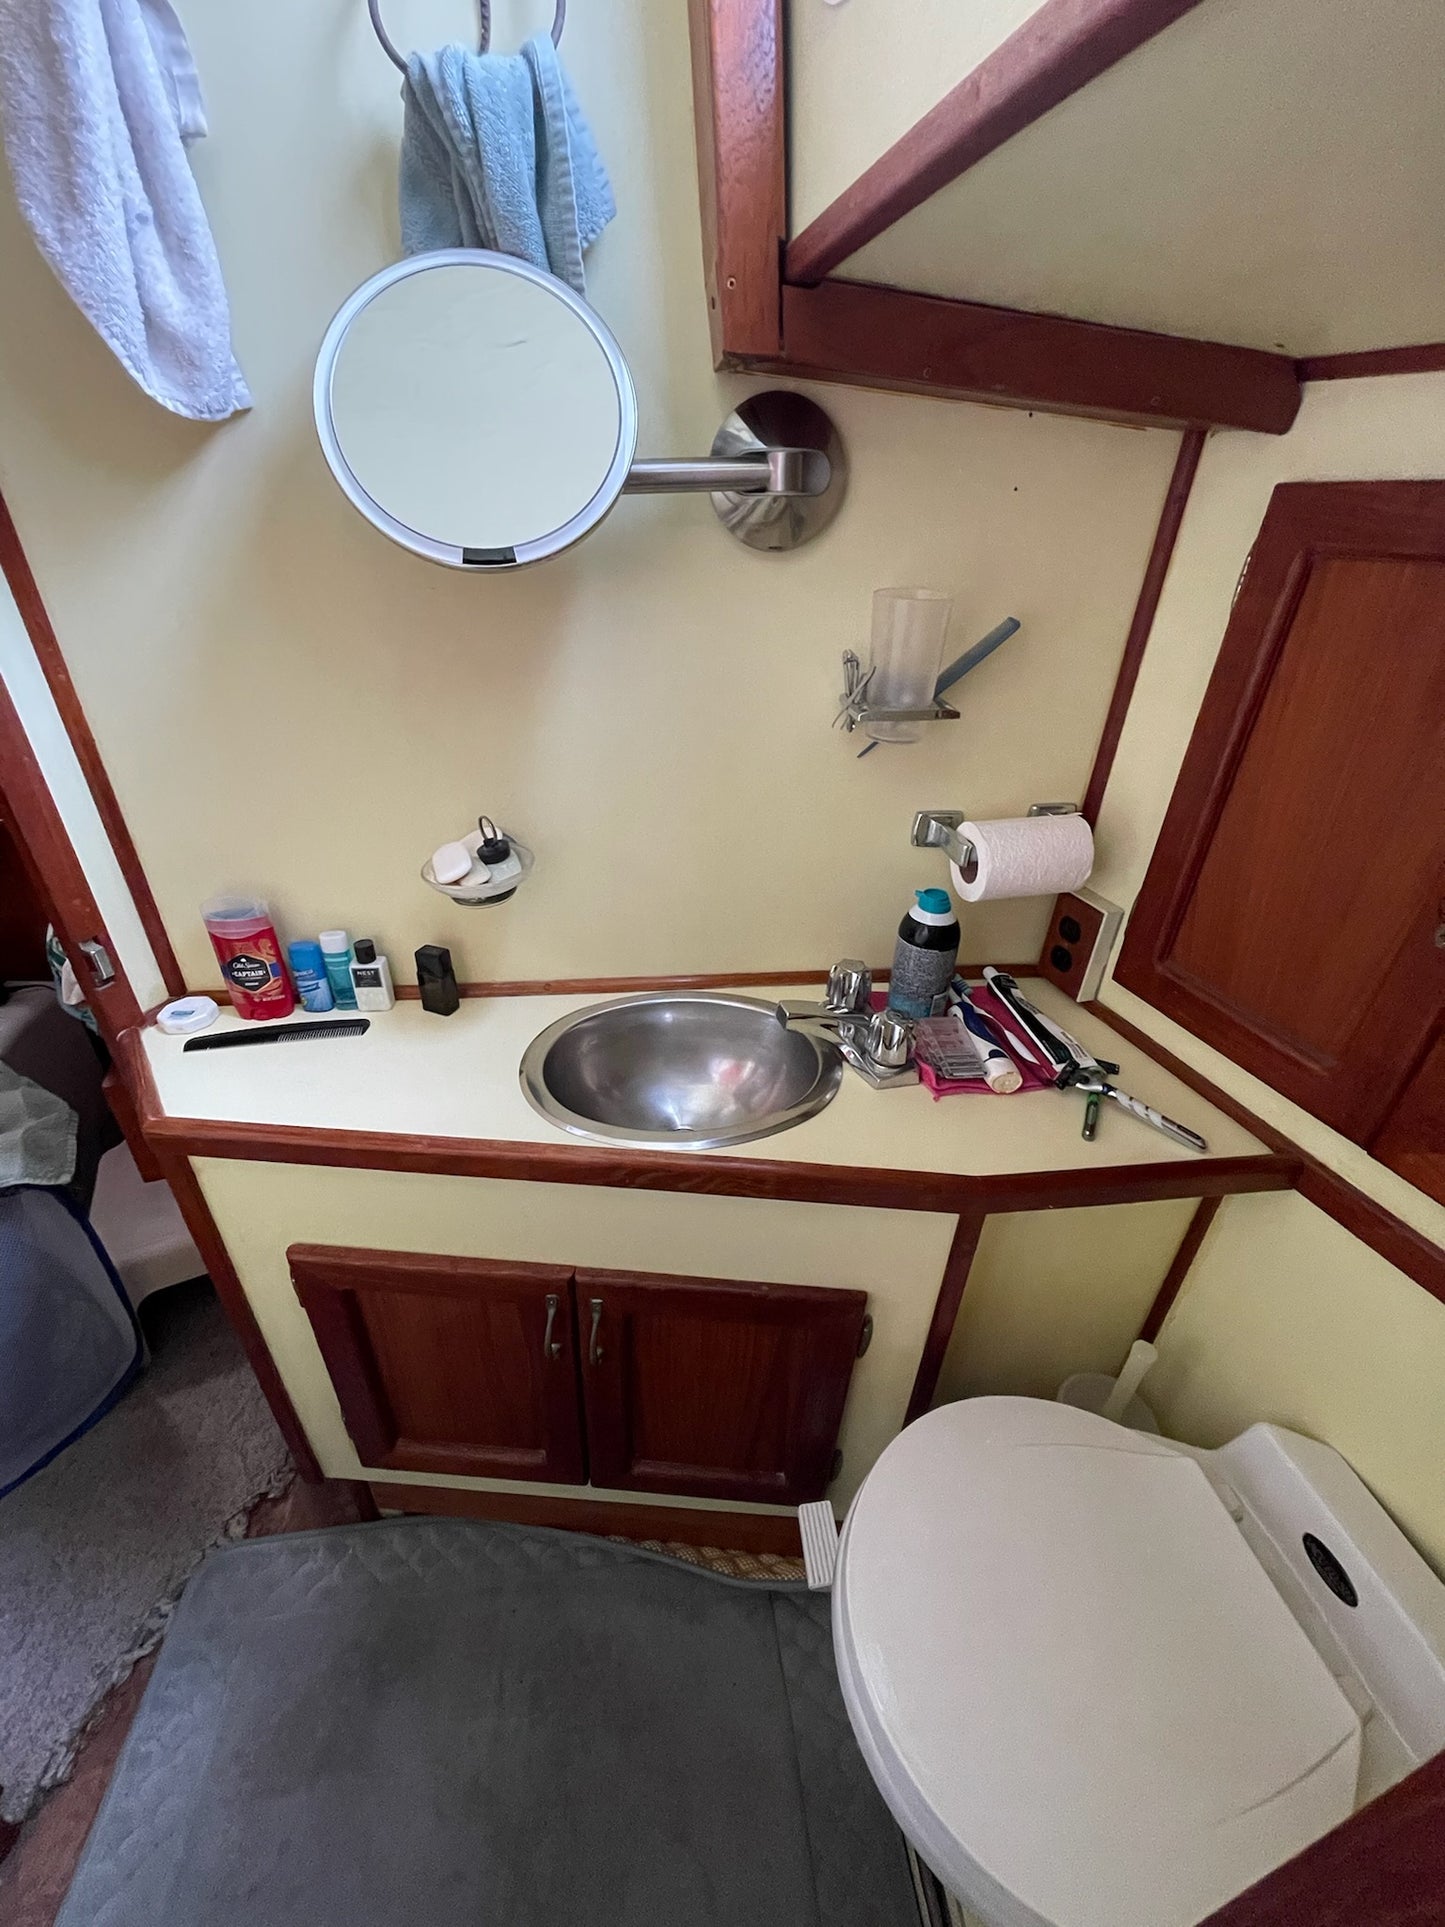 REDUCED! 1979 48' FORBES COOPER MAPLE LEAF CENTER COCKPIT SAILBOAT. LOCATED IN ENSENADA, MEXICO